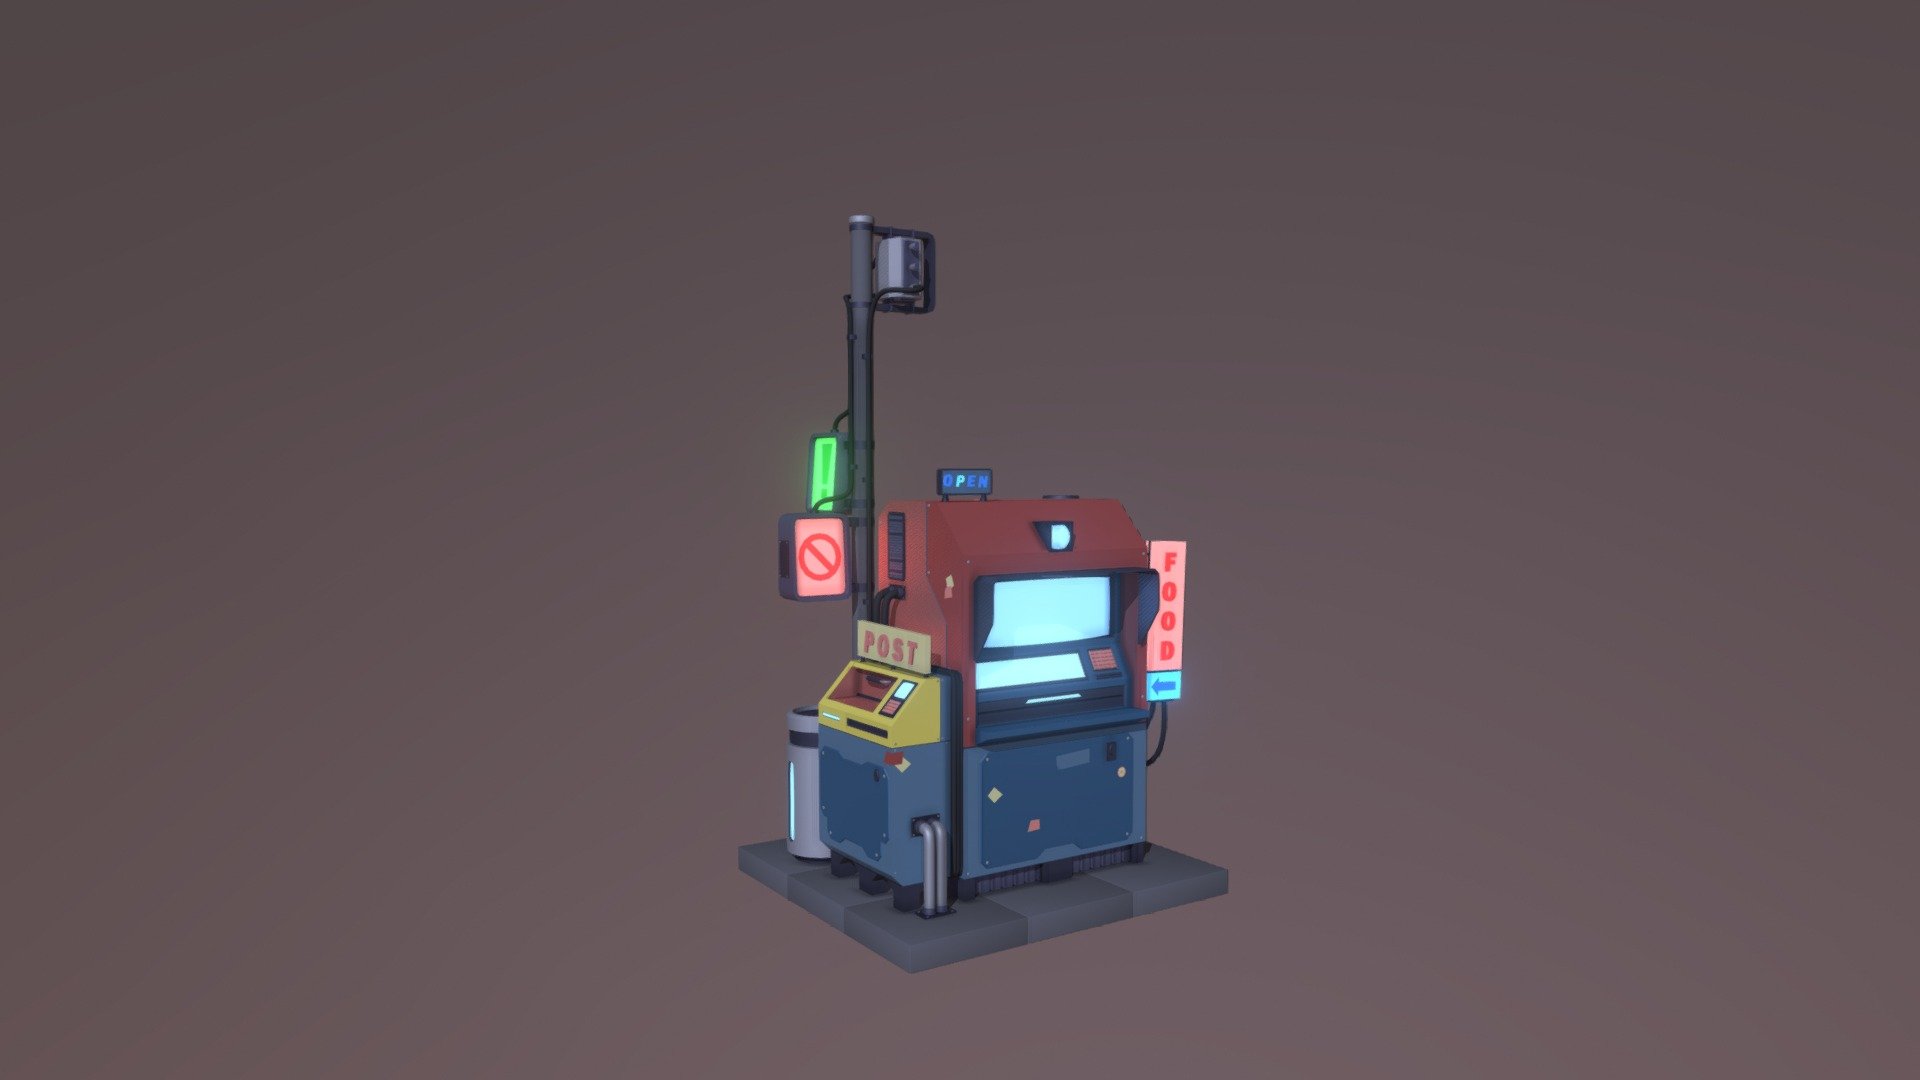 Coursework work for XYZ School. Si-Fi Vending machine concept by Jesse Riggle.
https://jesseriggle.tumblr.com/post/169537671073/i-made-some-more-isometric-scifi-inspired/amp - [XYZ School] Vending machine - Download Free 3D model by pretty_sloth 3d model